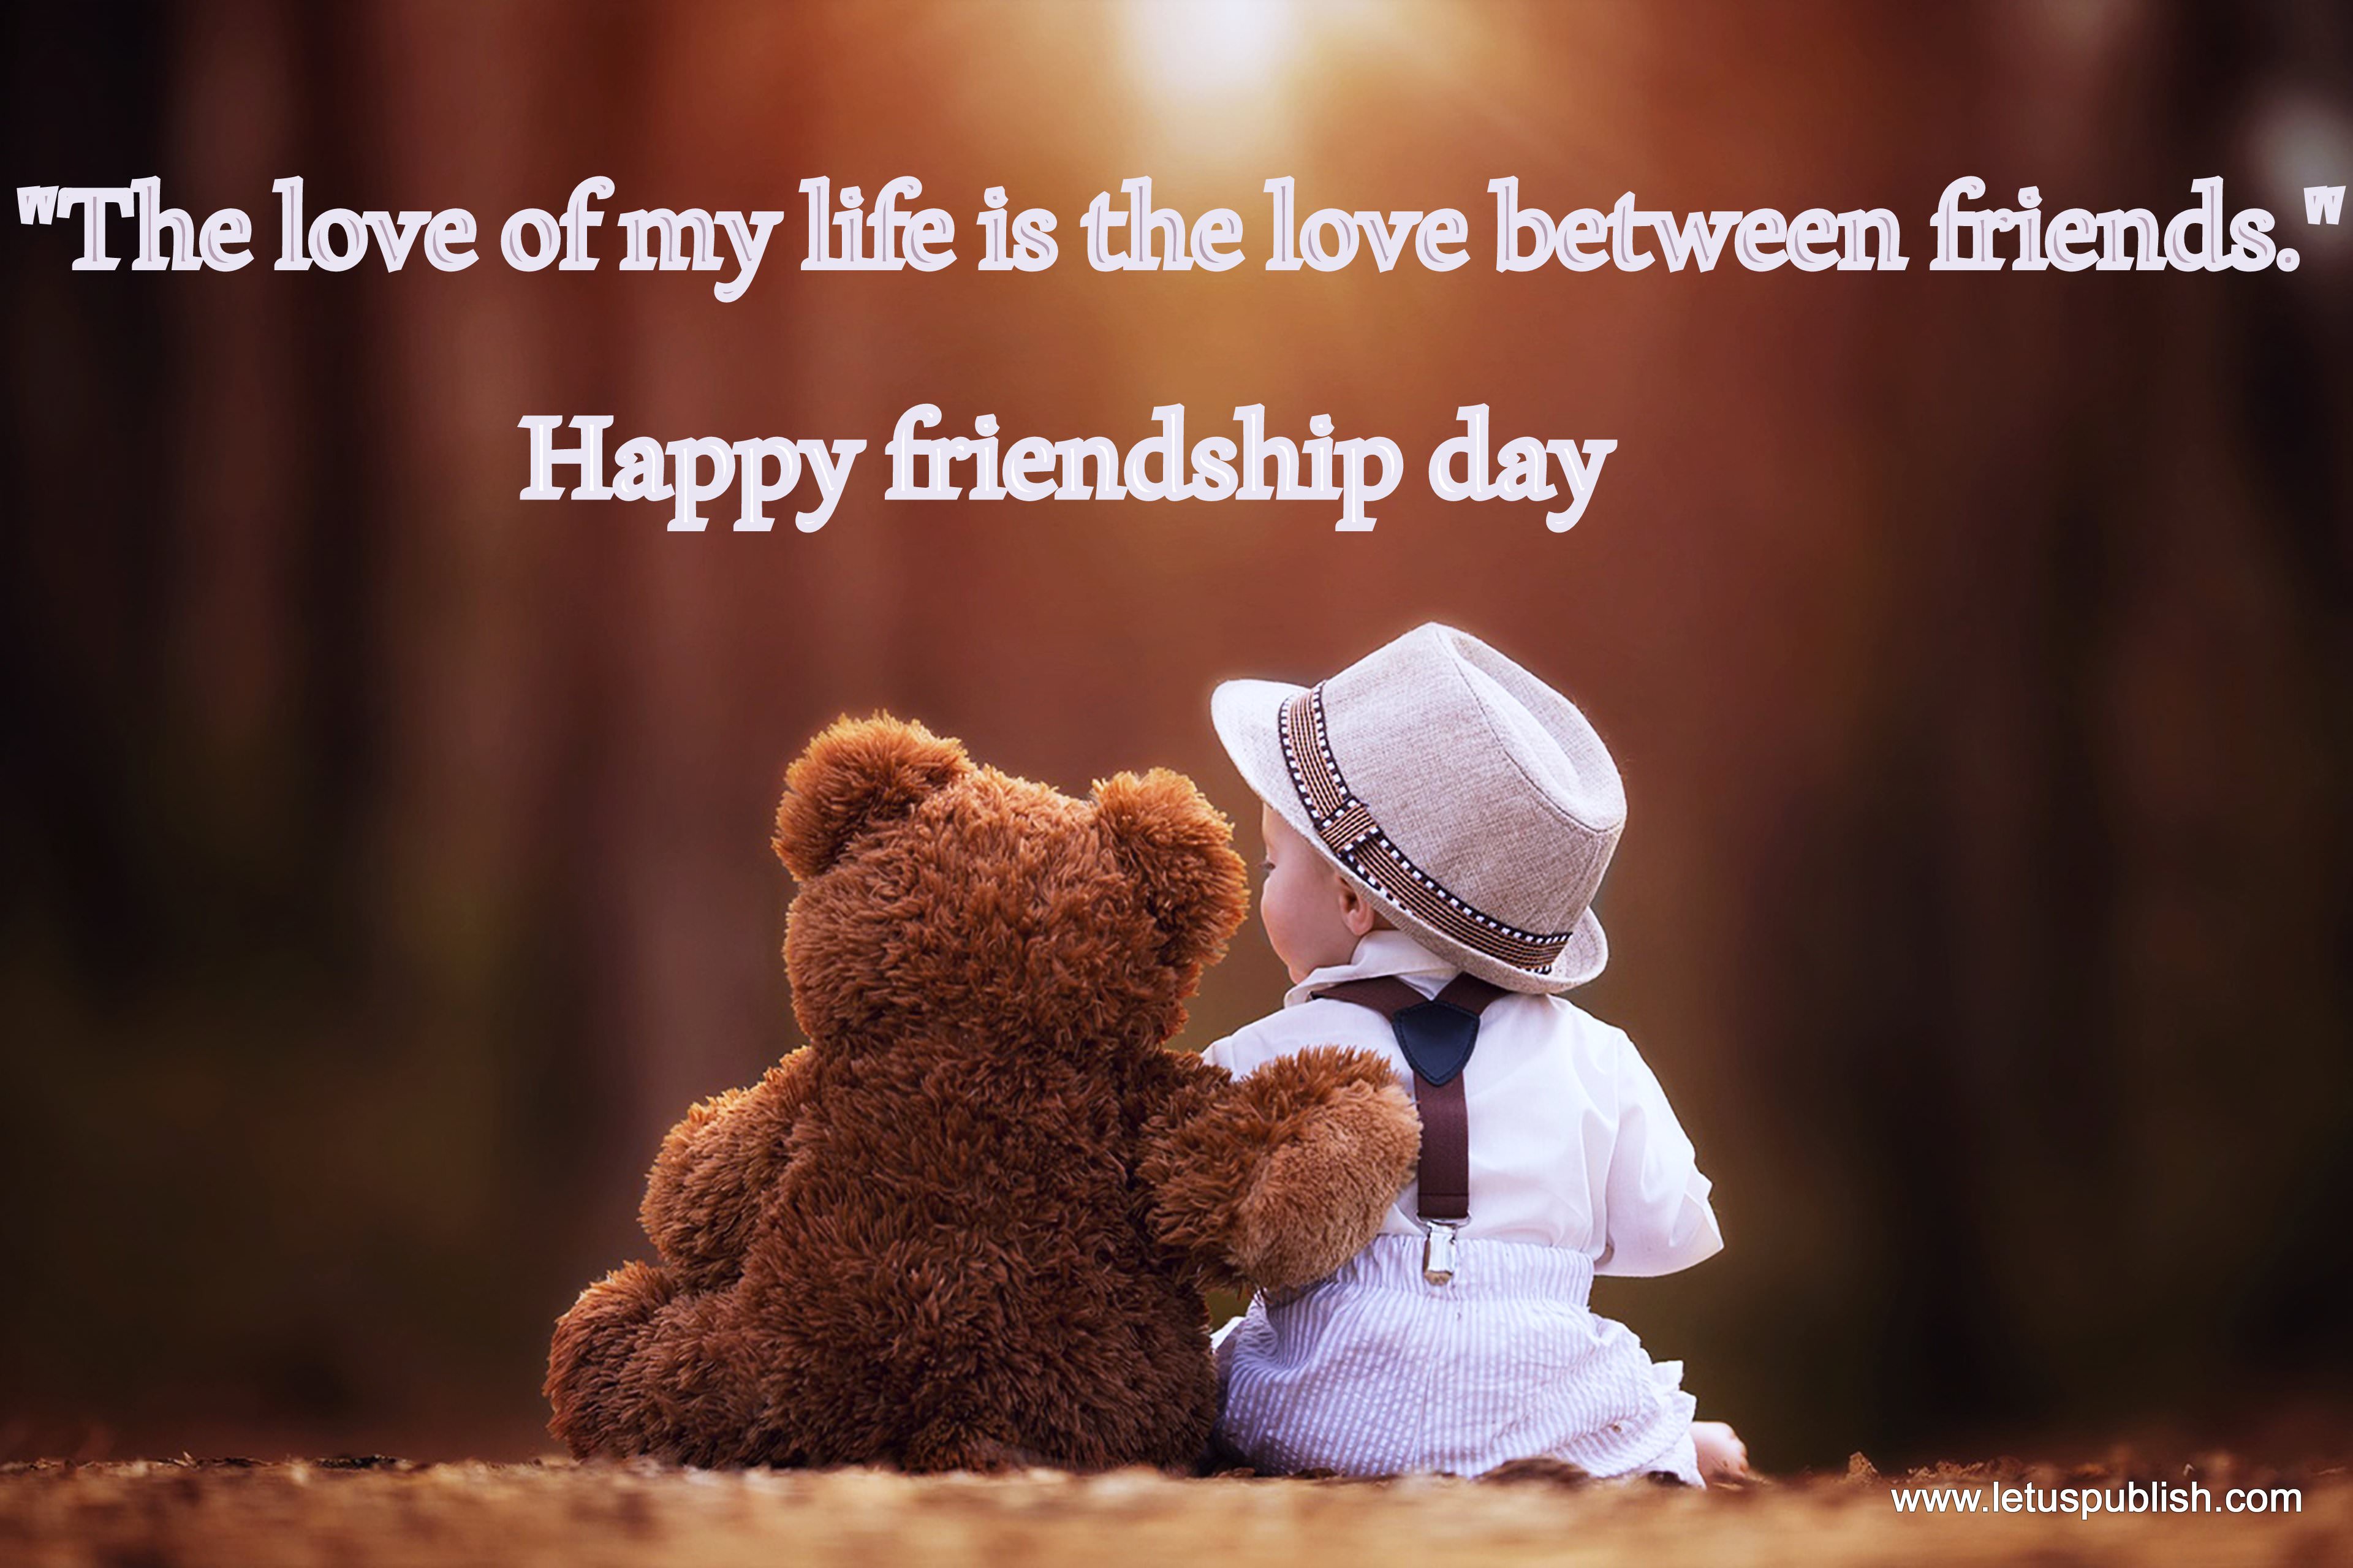 Friendship Day Wallpapers Hd - Love Friendship Day Images Hd - 3840x2559  Wallpaper 